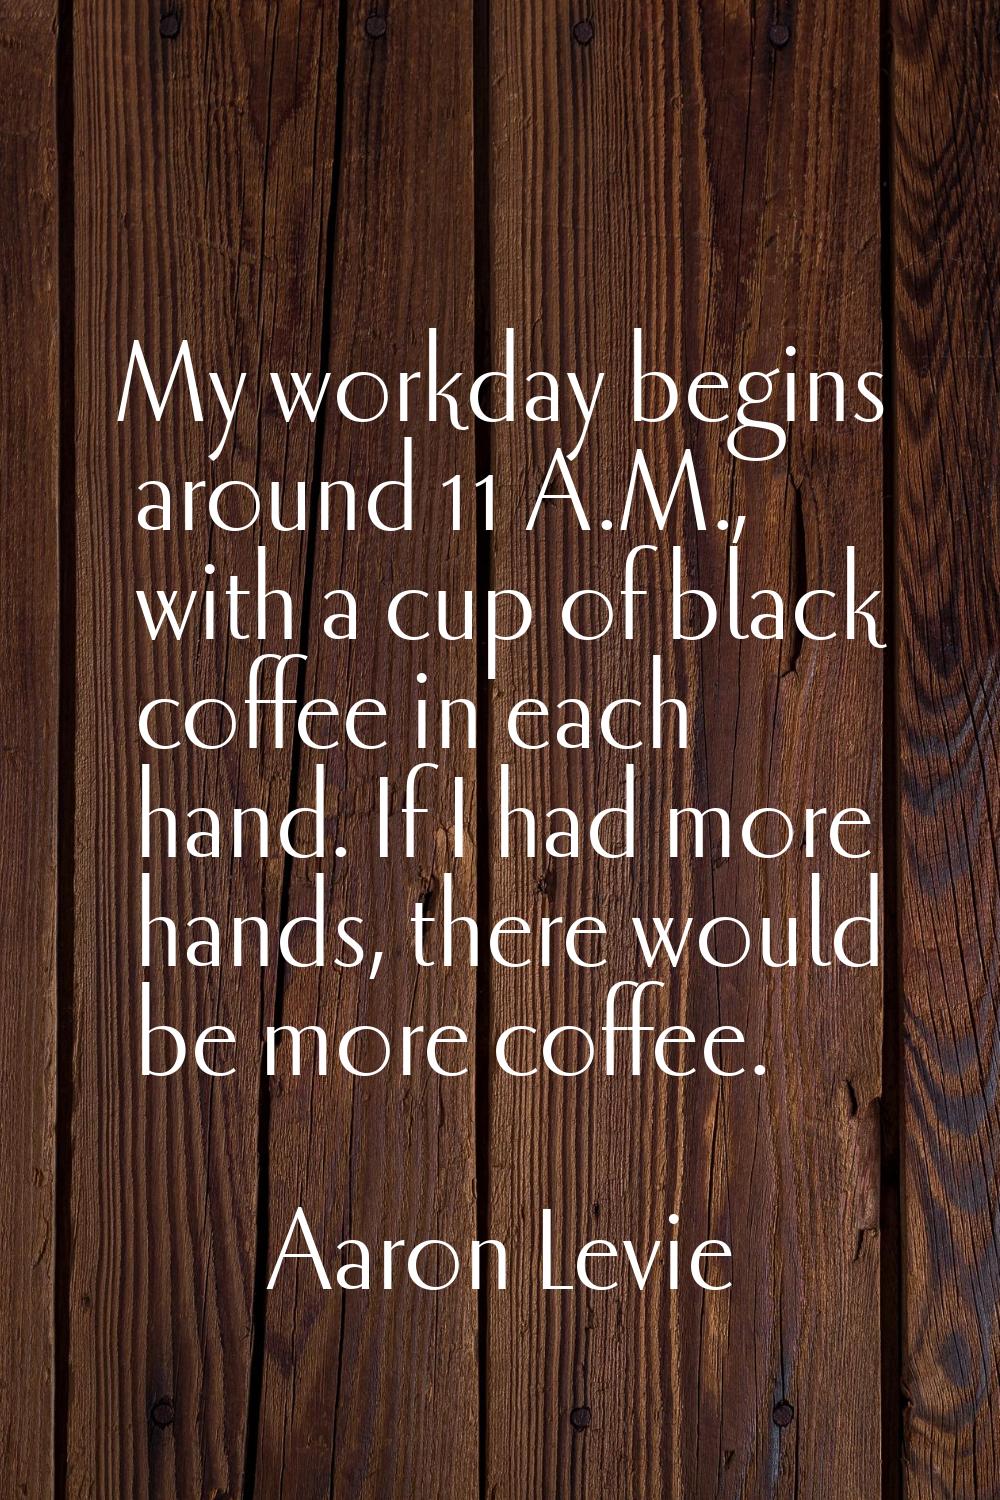 My workday begins around 11 A.M., with a cup of black coffee in each hand. If I had more hands, the